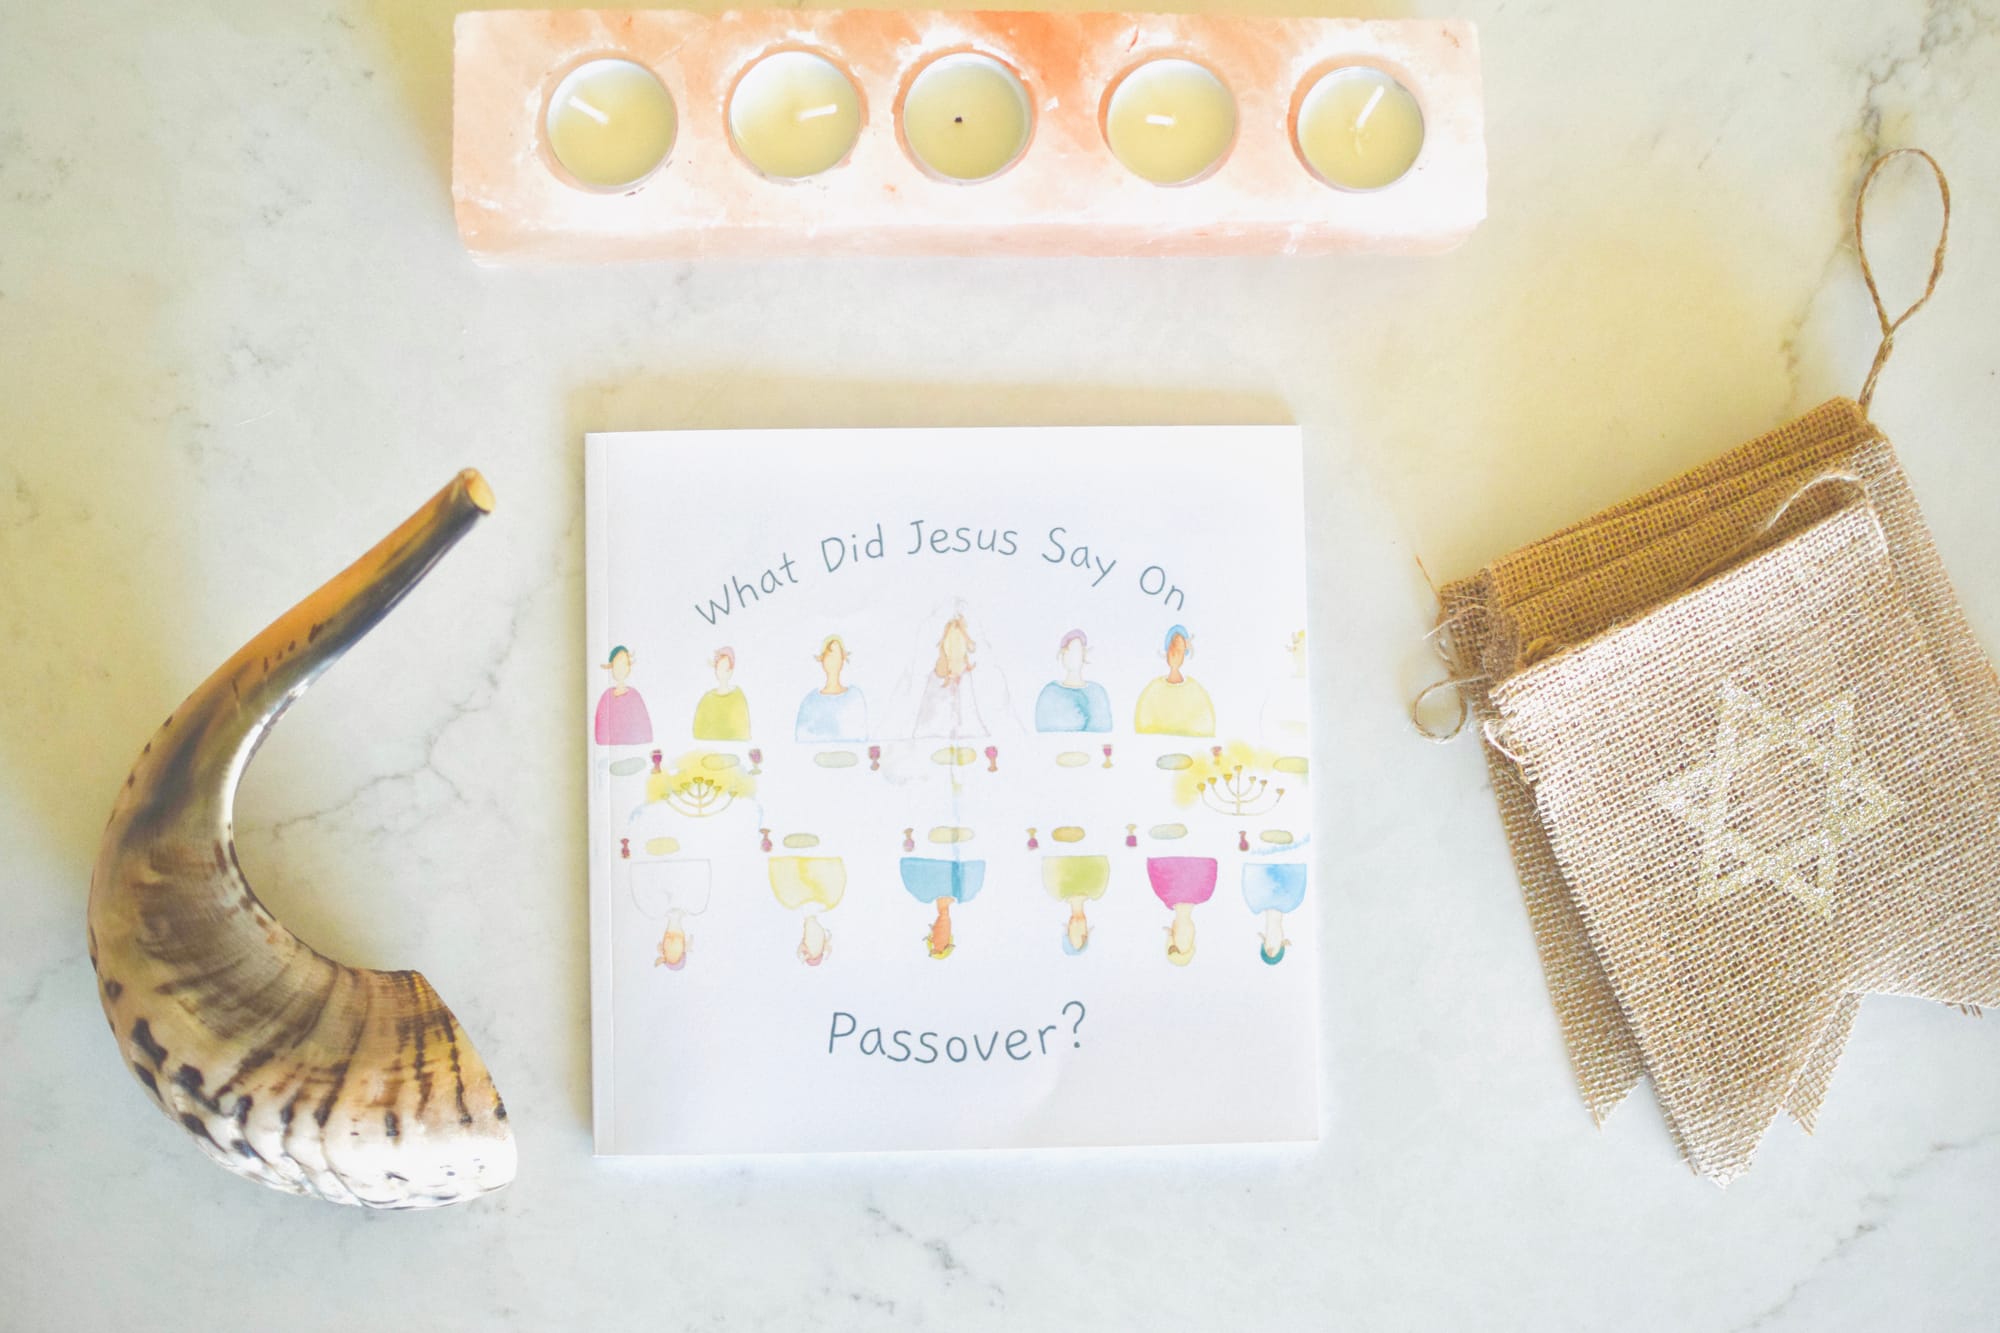 Passover Roundup! Sharing My Favorite Activities To Do With Children 👨‍👩‍👧‍👦